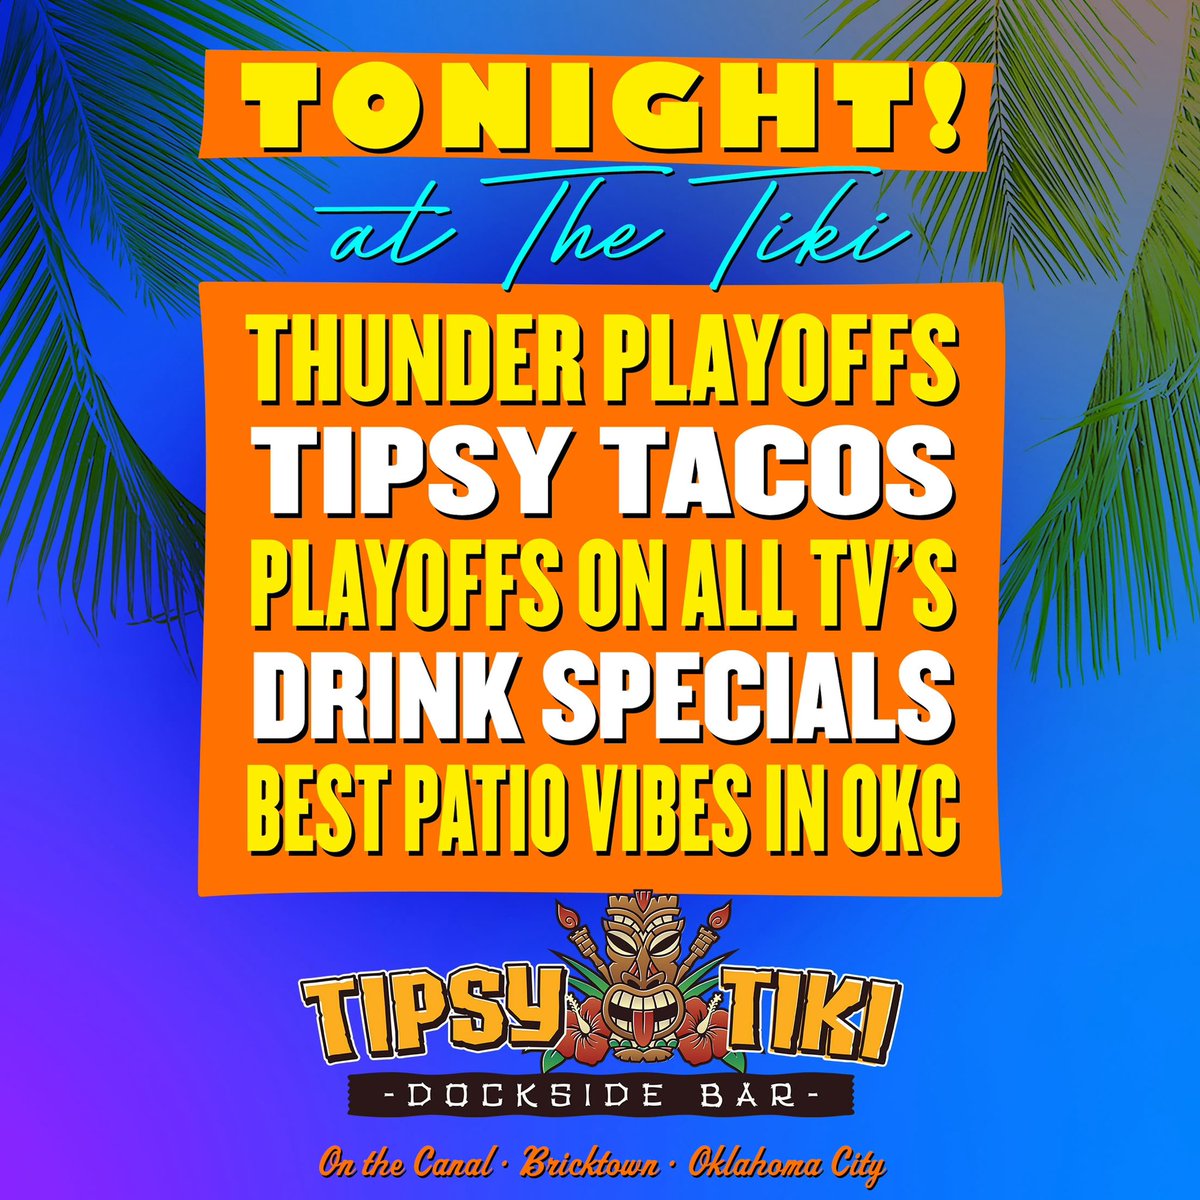 Your OKC Playoff Watch Party Headquarters! Tipsy Tiki on The Canal in Bricktown OKC. Doors open at 4pm!